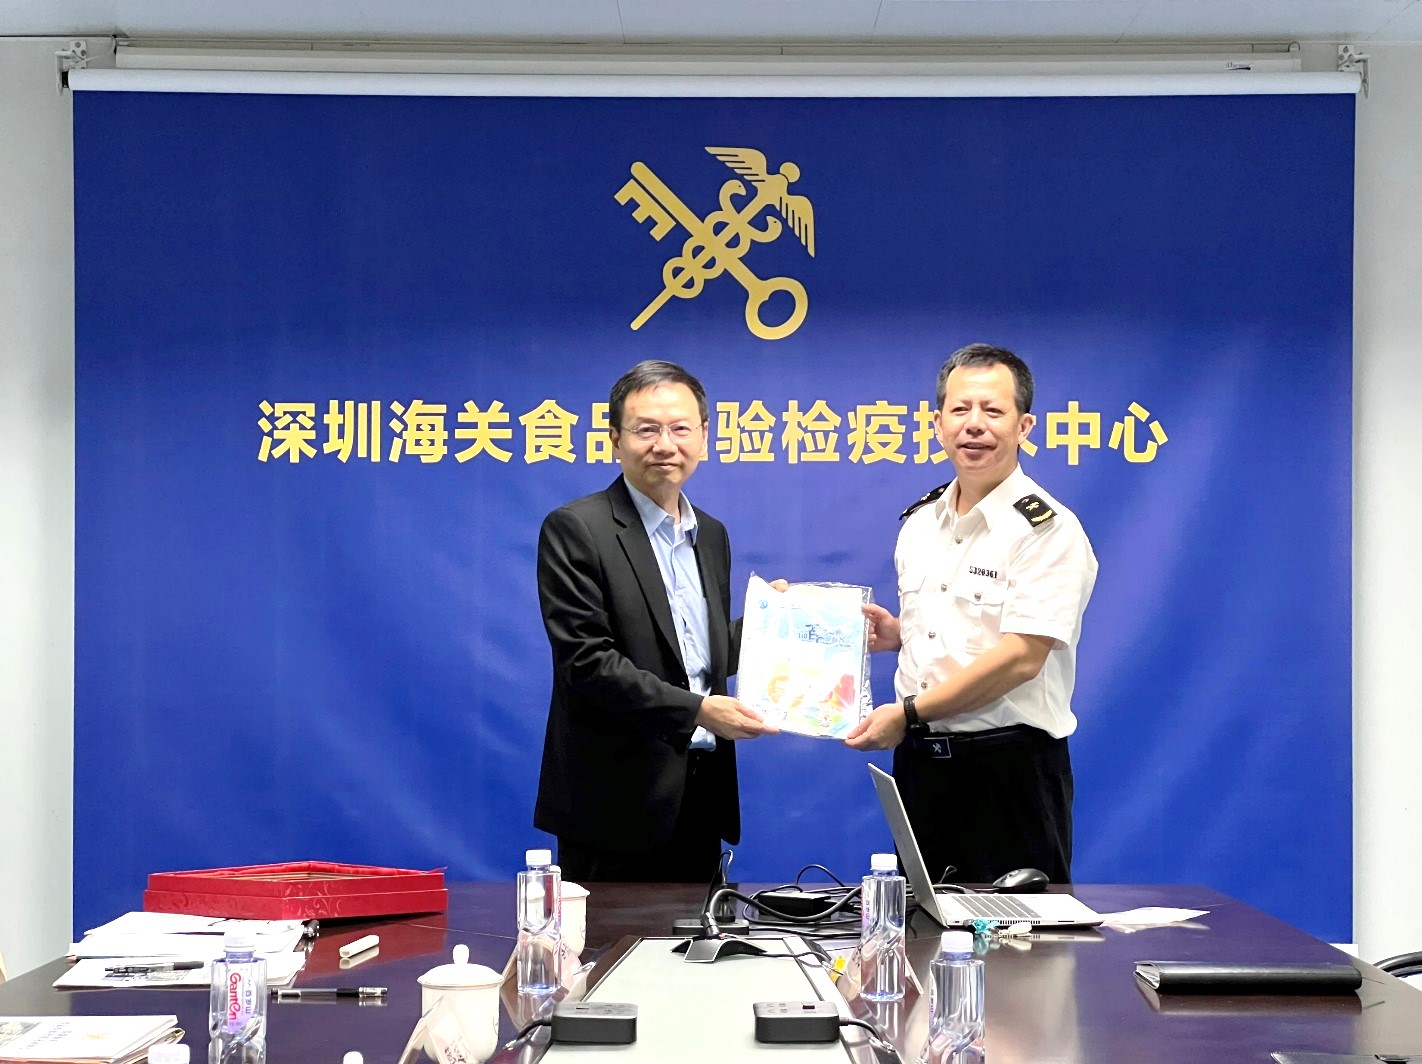 Dr. LEE Wai-on (left) presents souvenir to Mr. LIN Yan-kui (right).